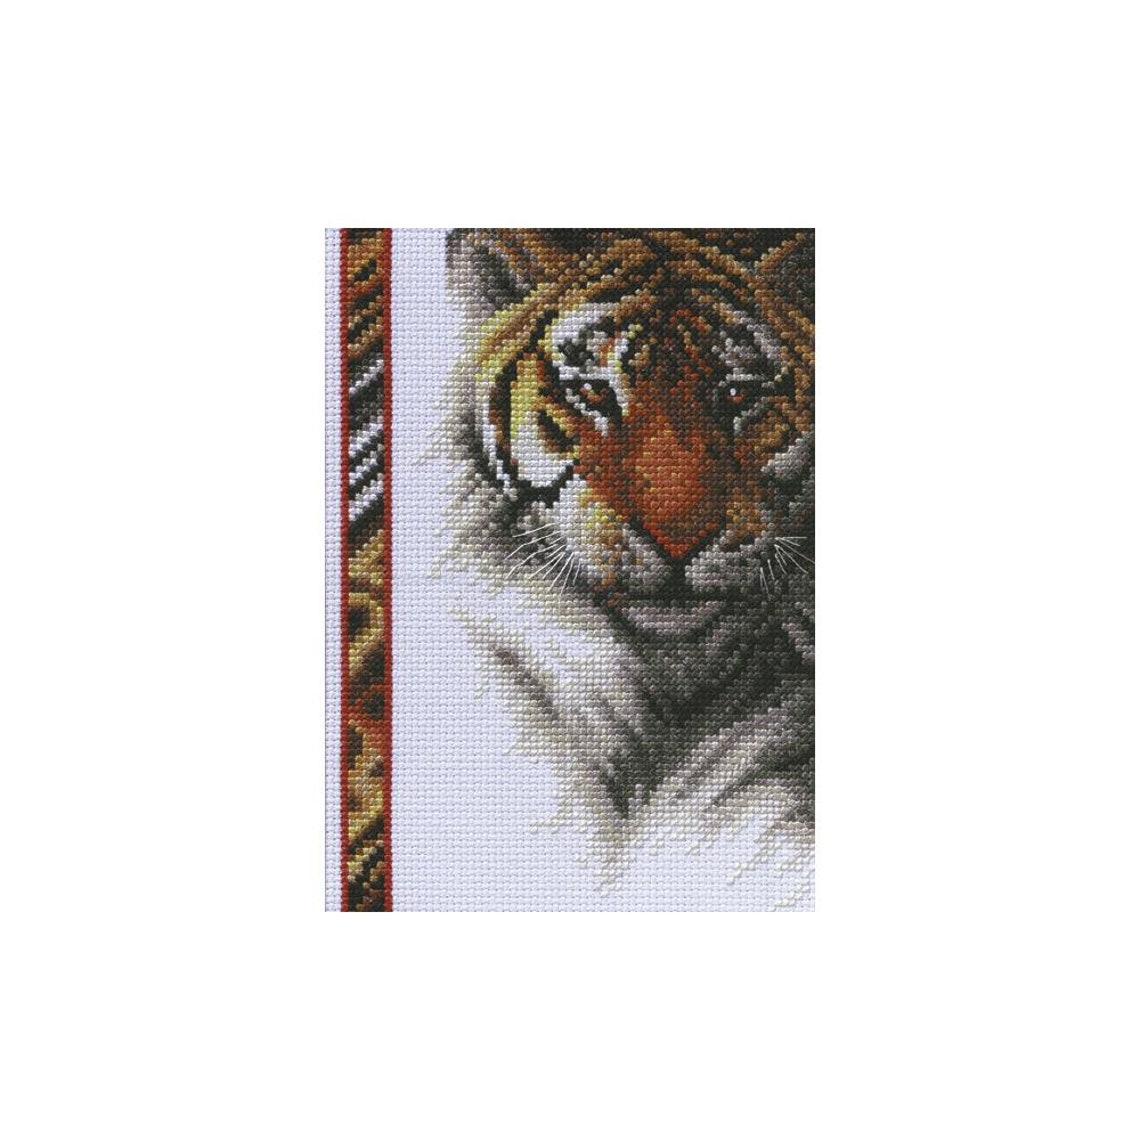 Tiger Counted Cross Stitch Kit Etsy